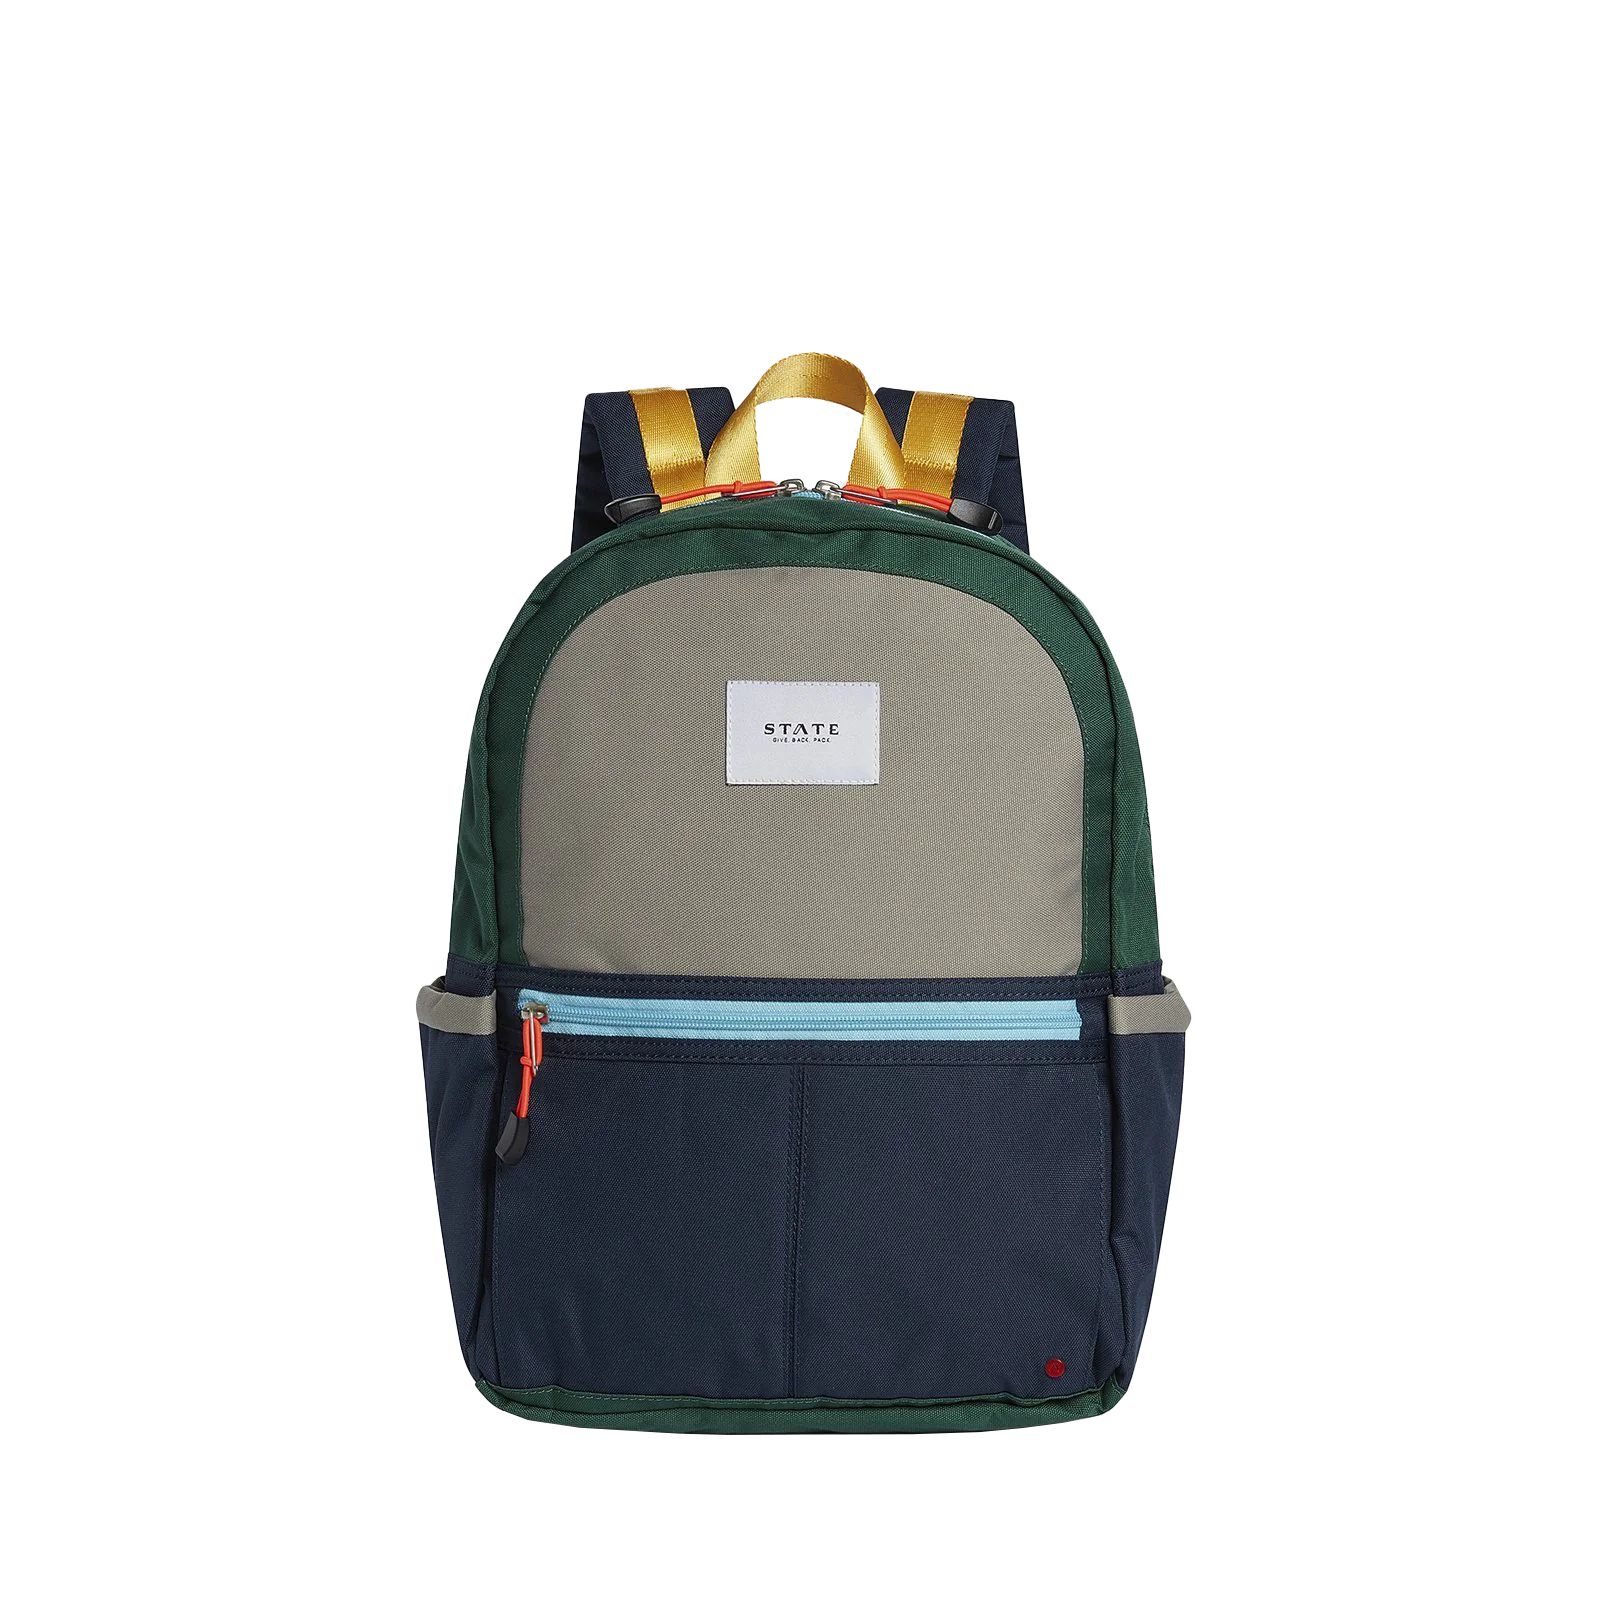 Kane Kids Travel Backpack Color Block Green/Navy | STATE Bags